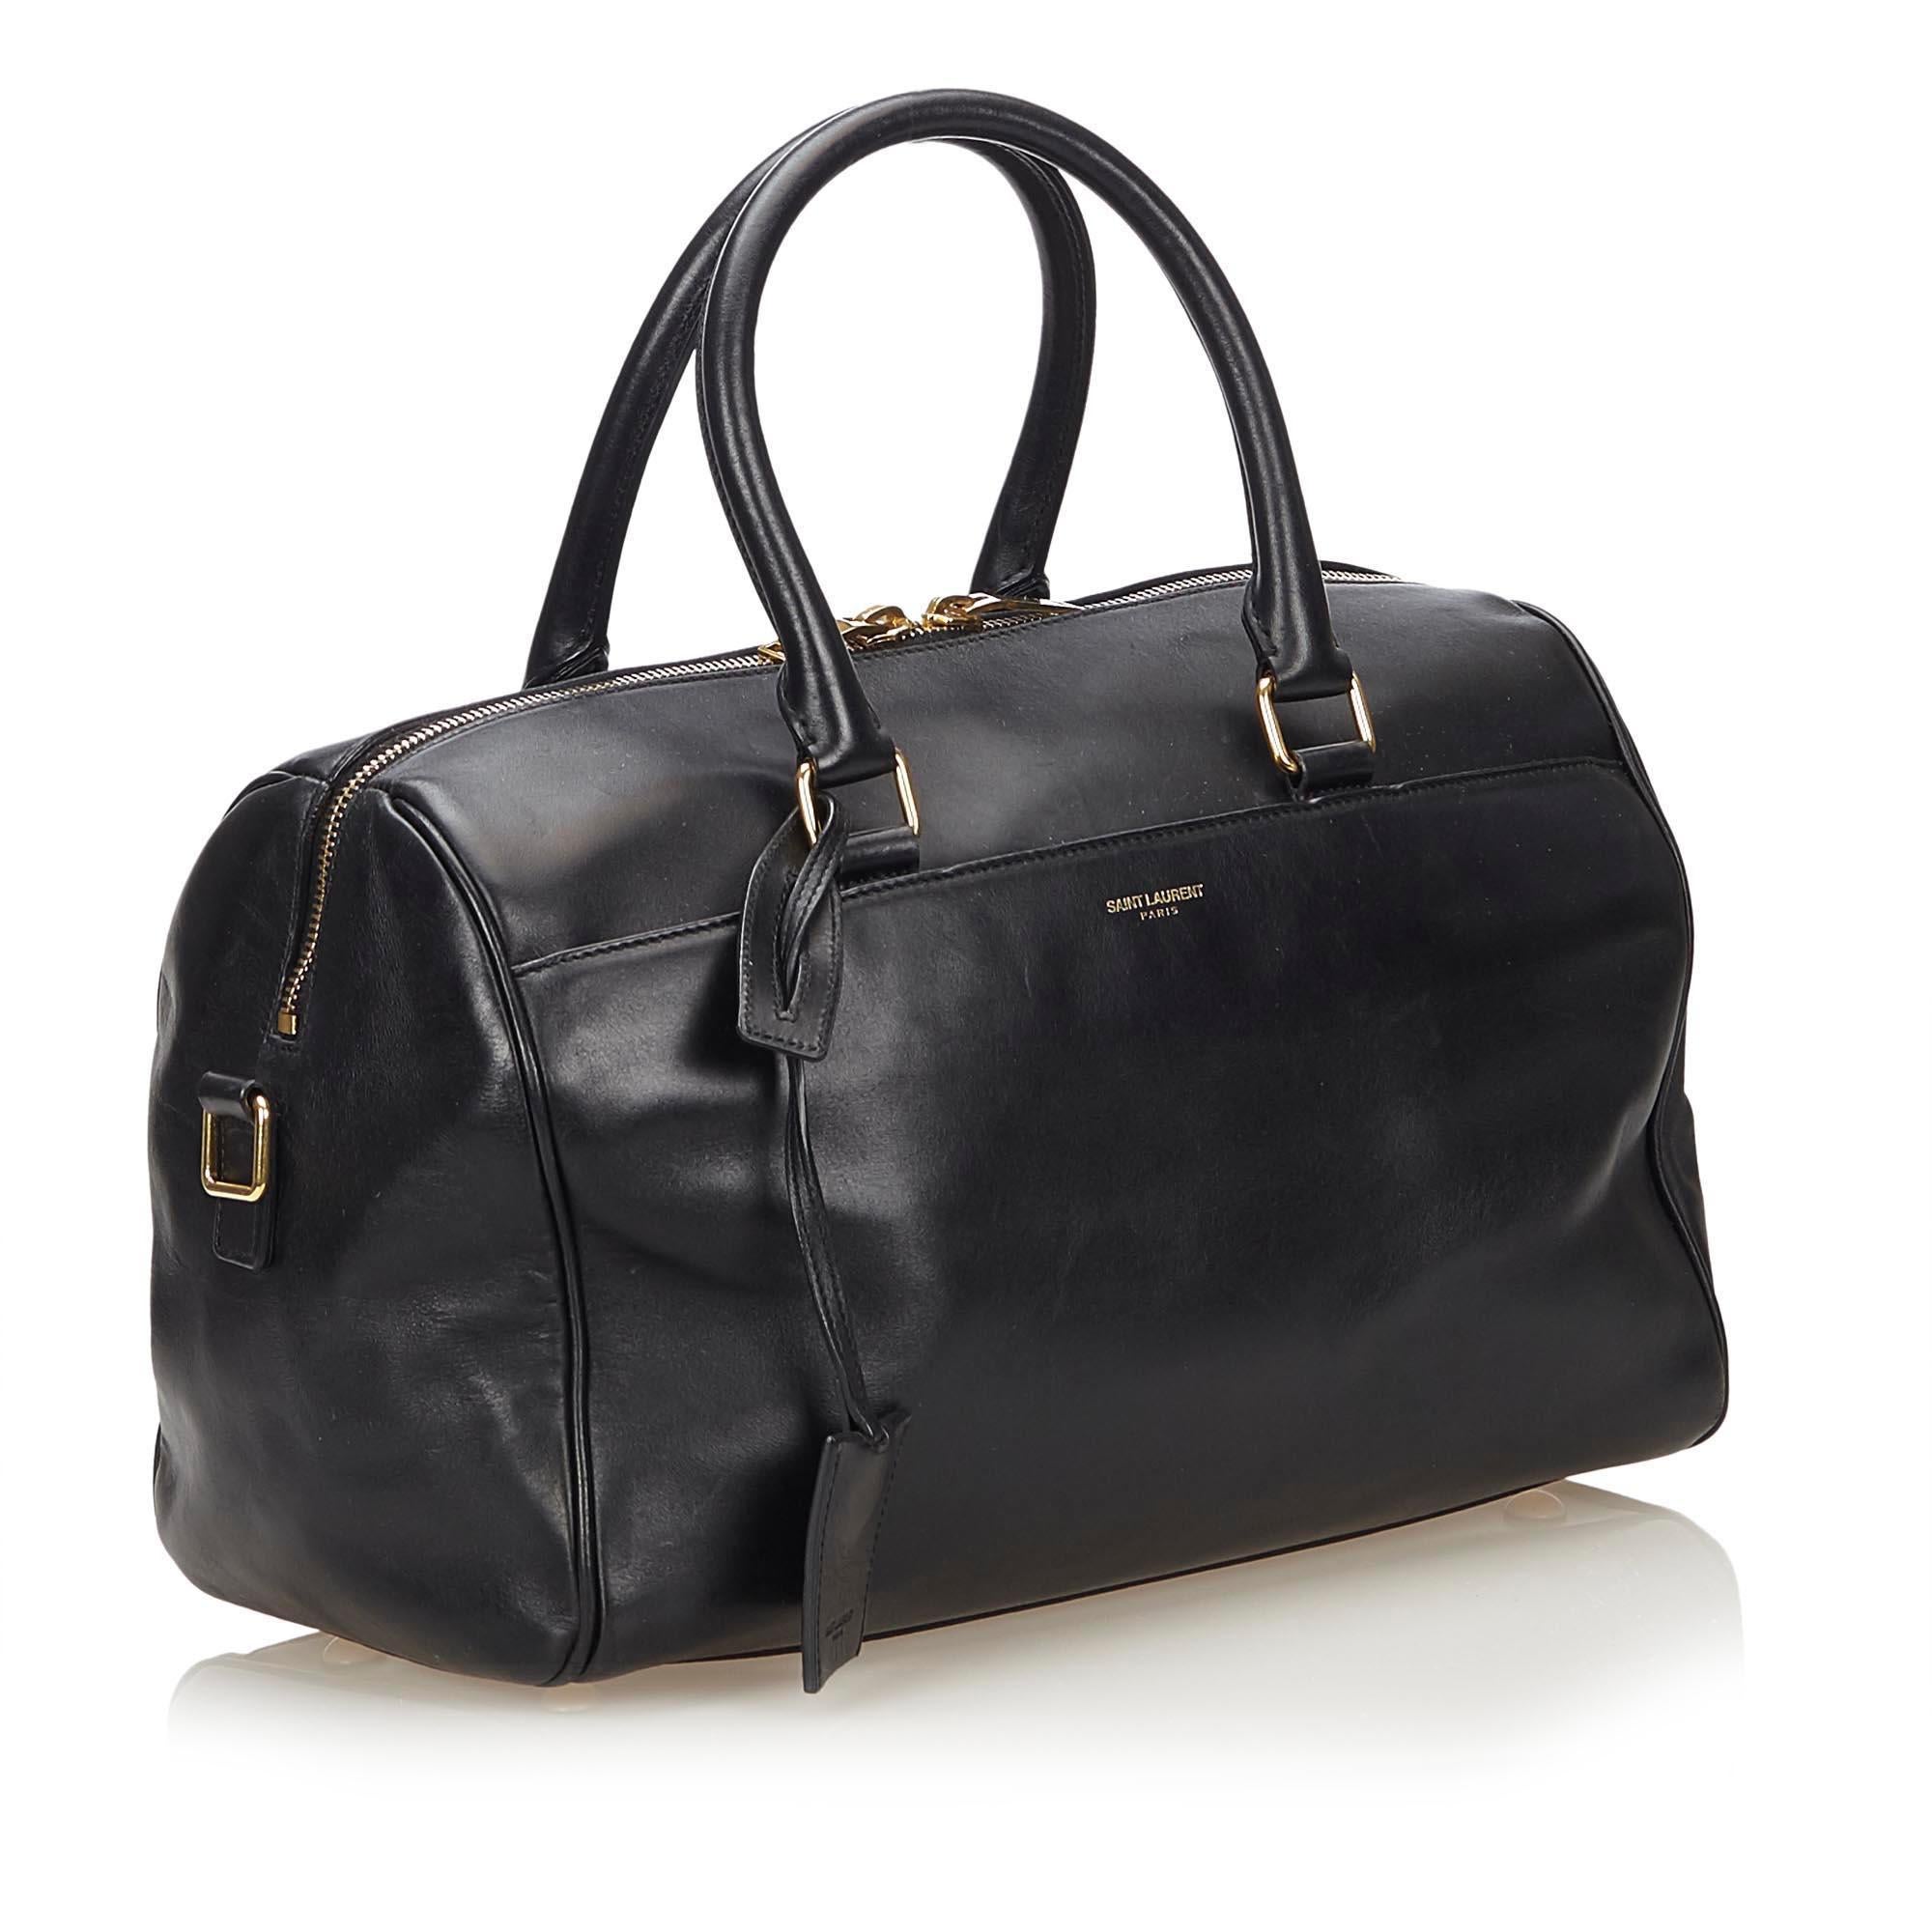 The Classic Duffle 6 features a leather body, rolled leather handles, top zip closure, and interior zip pocket. It carries as B+ condition rating.

Inclusions: 
This item does not come with inclusions.

Dimensions:
Length: 18.00 cm
Width: 30.00